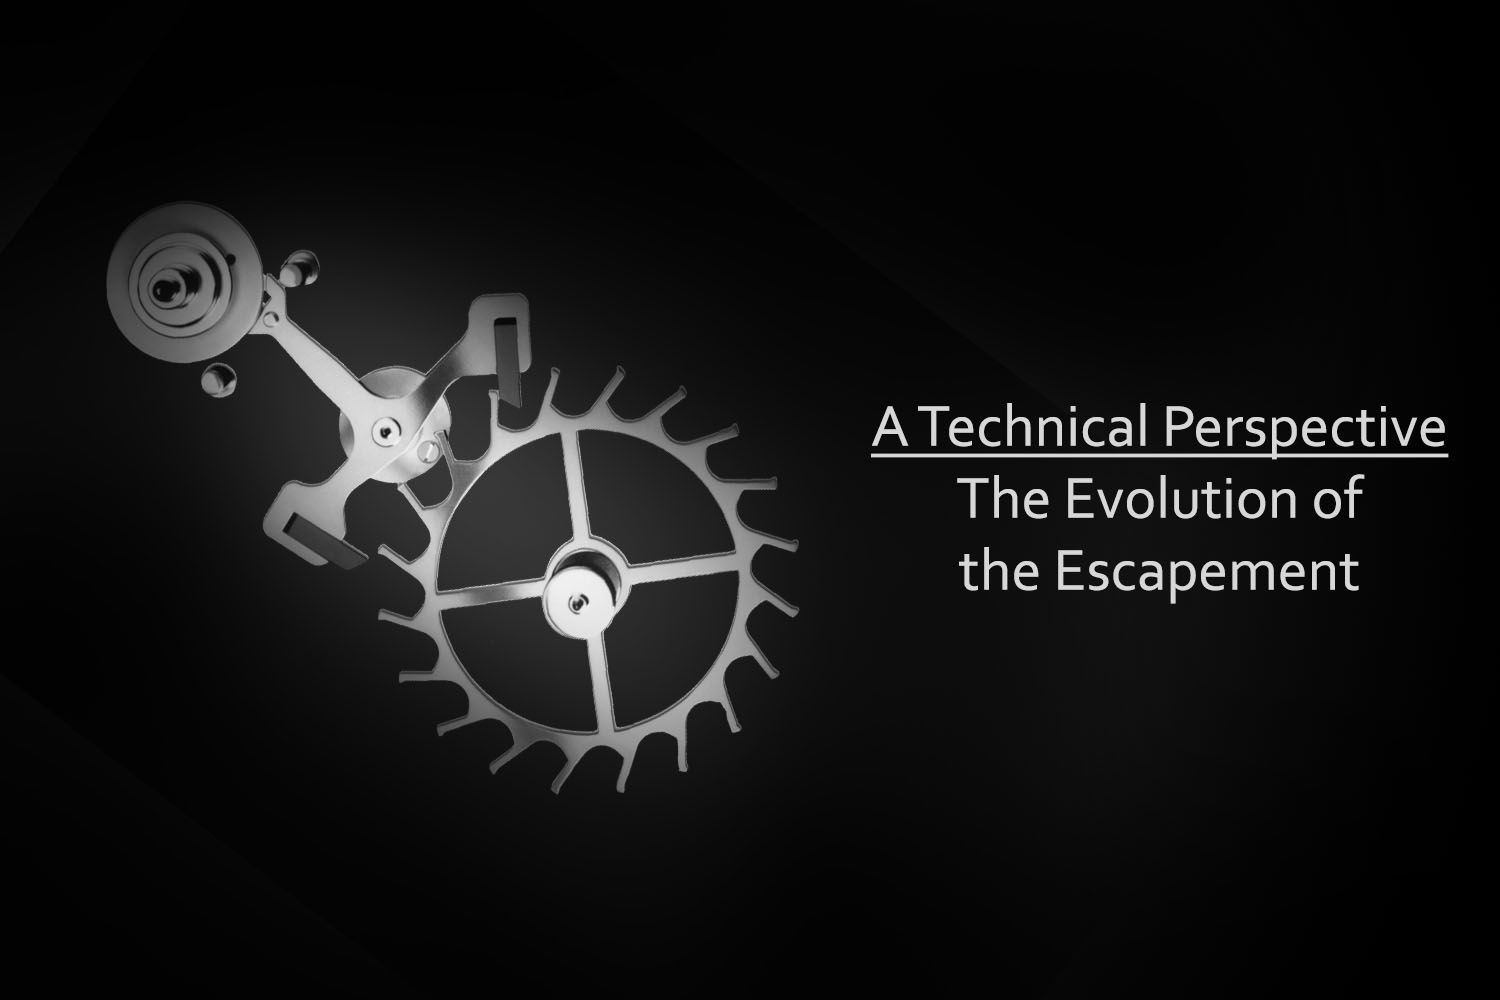 A Technical Perspective - The Evolution of the Escapement and recent innovations